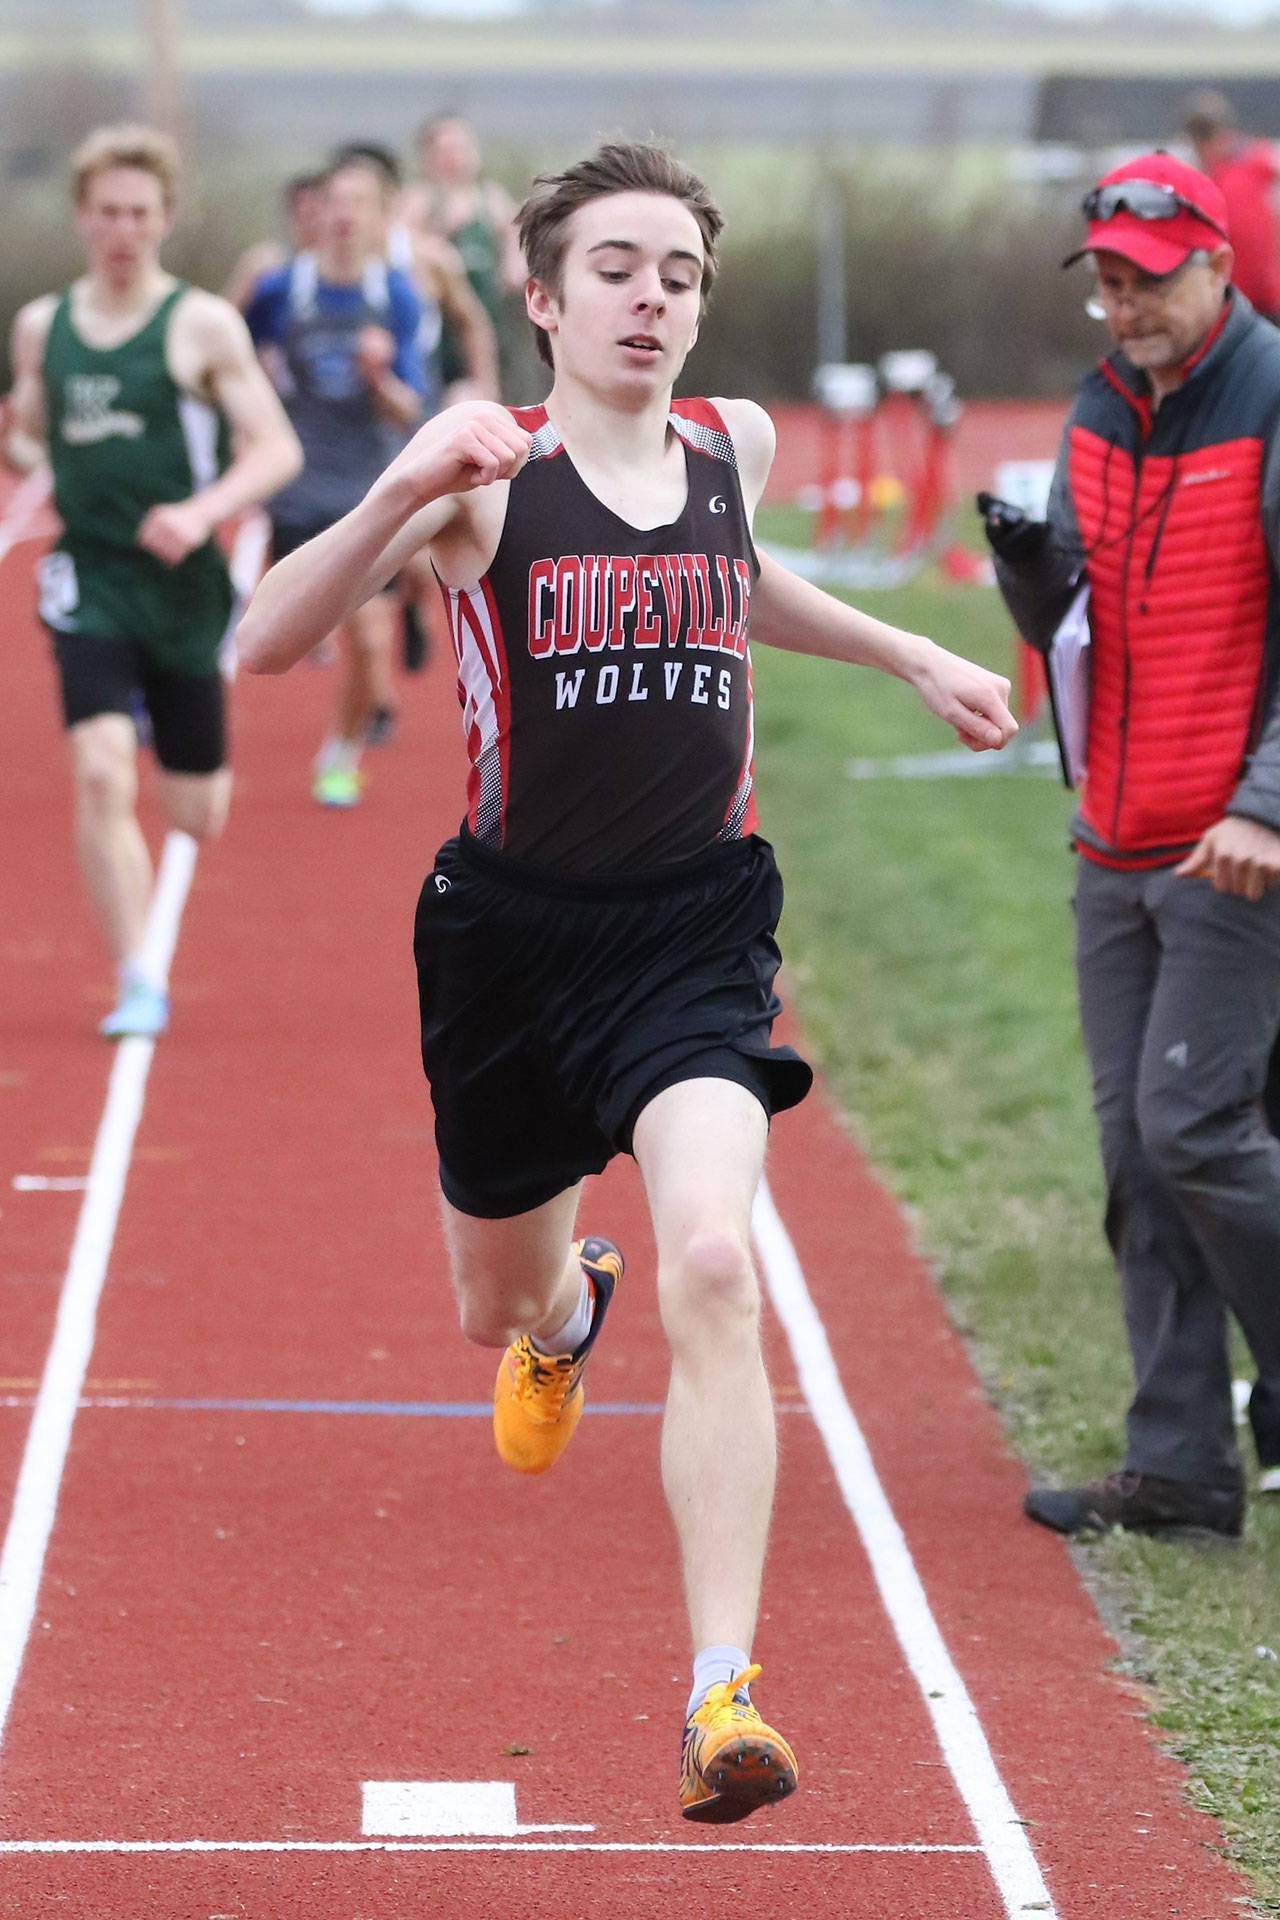 Danny Conlisk, shown here running for the Coupeville track team, will provide veteran leadership for the new cross country team. (Photo by John Fisken)